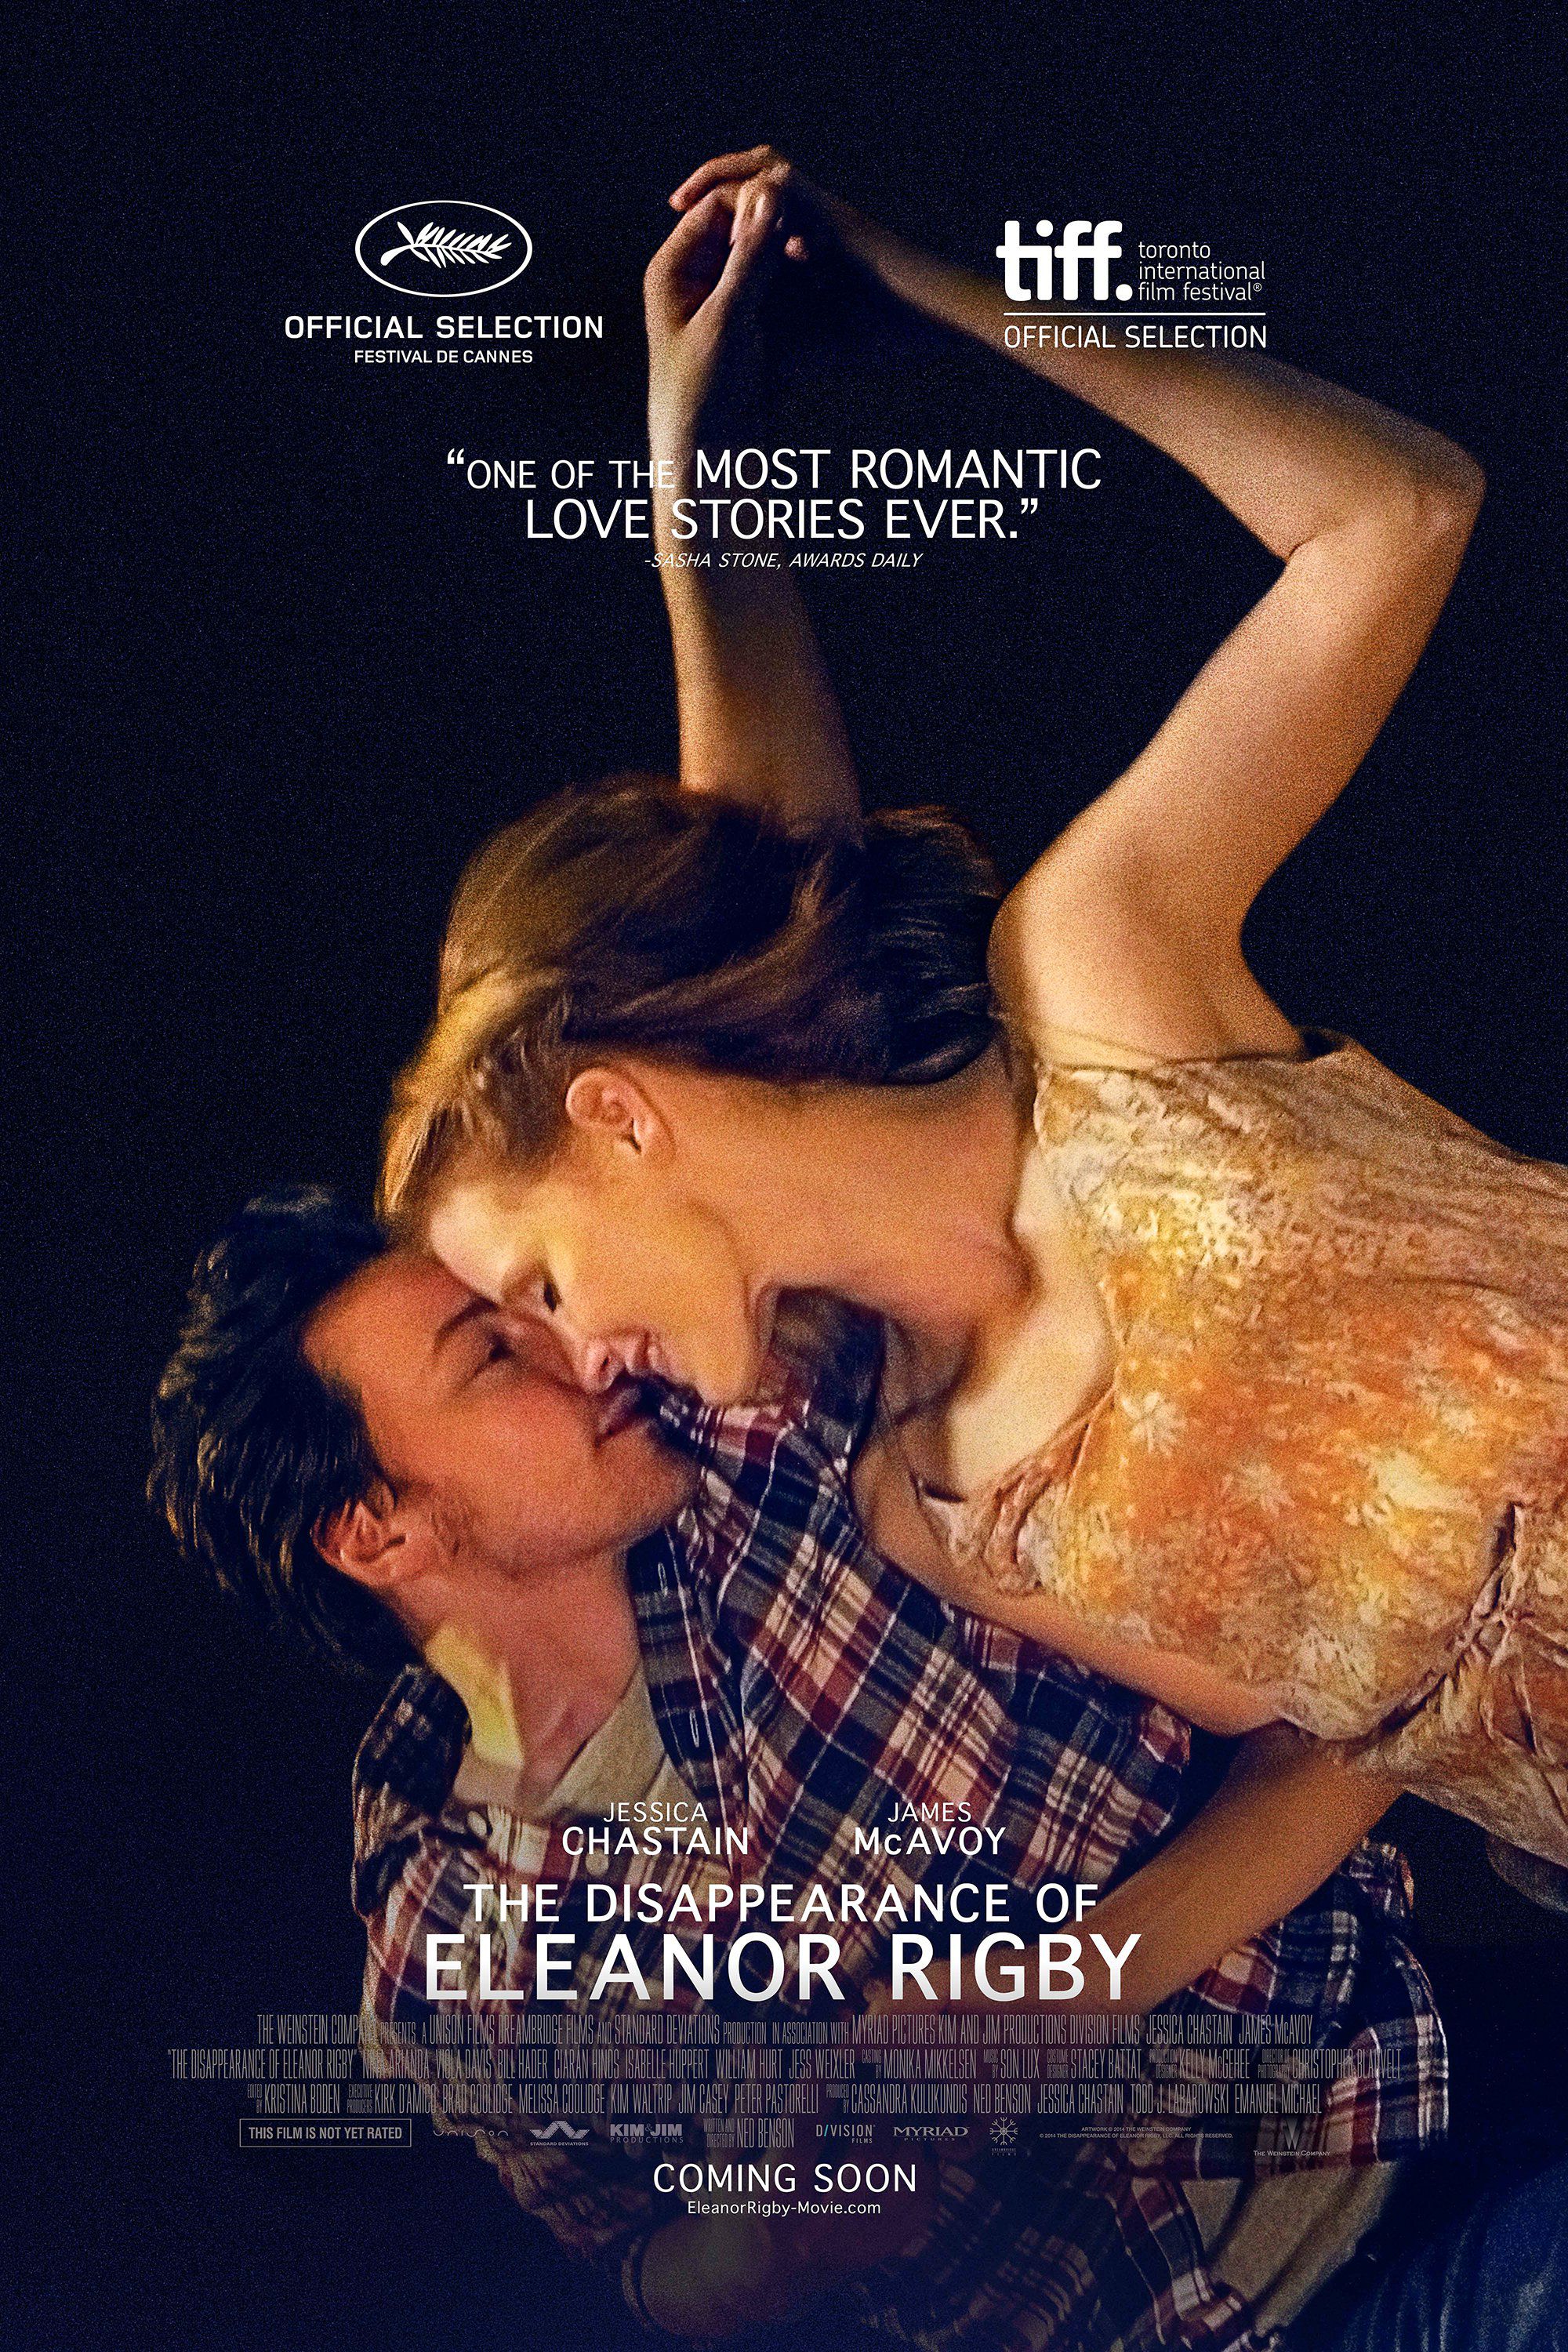 The Disappearance of Eleanor Rigby - Film (2014) streaming VF gratuit complet